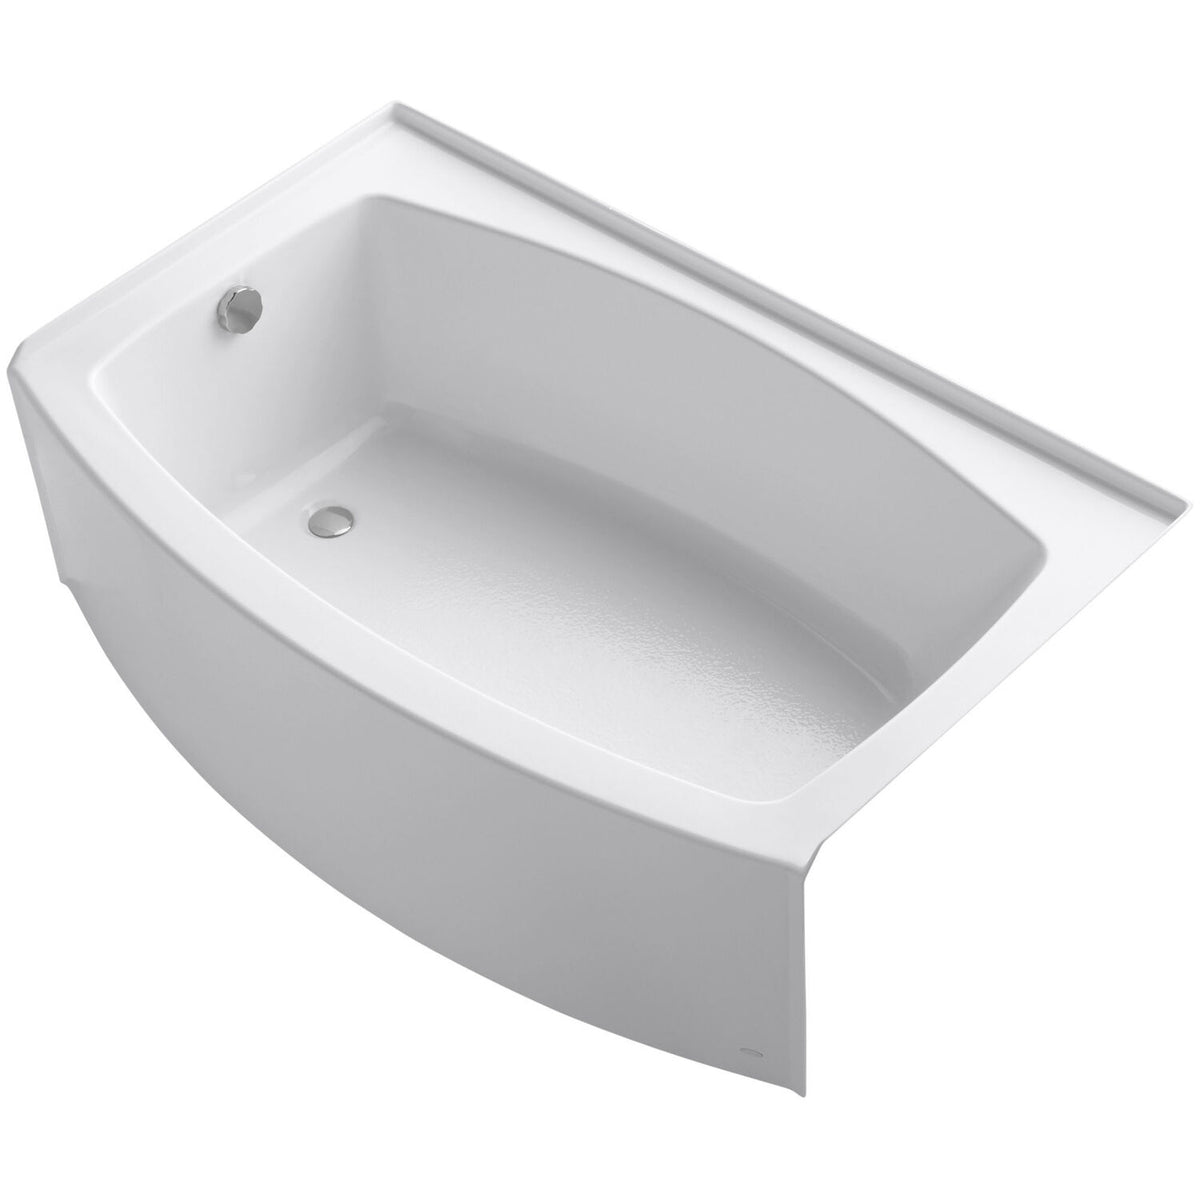 EXPANSE® 60 X 32-38 INCHES CURVED ALCOVE BATHTUB WITH INTEGRAL FLANGE, LEFT-HAND DRAIN